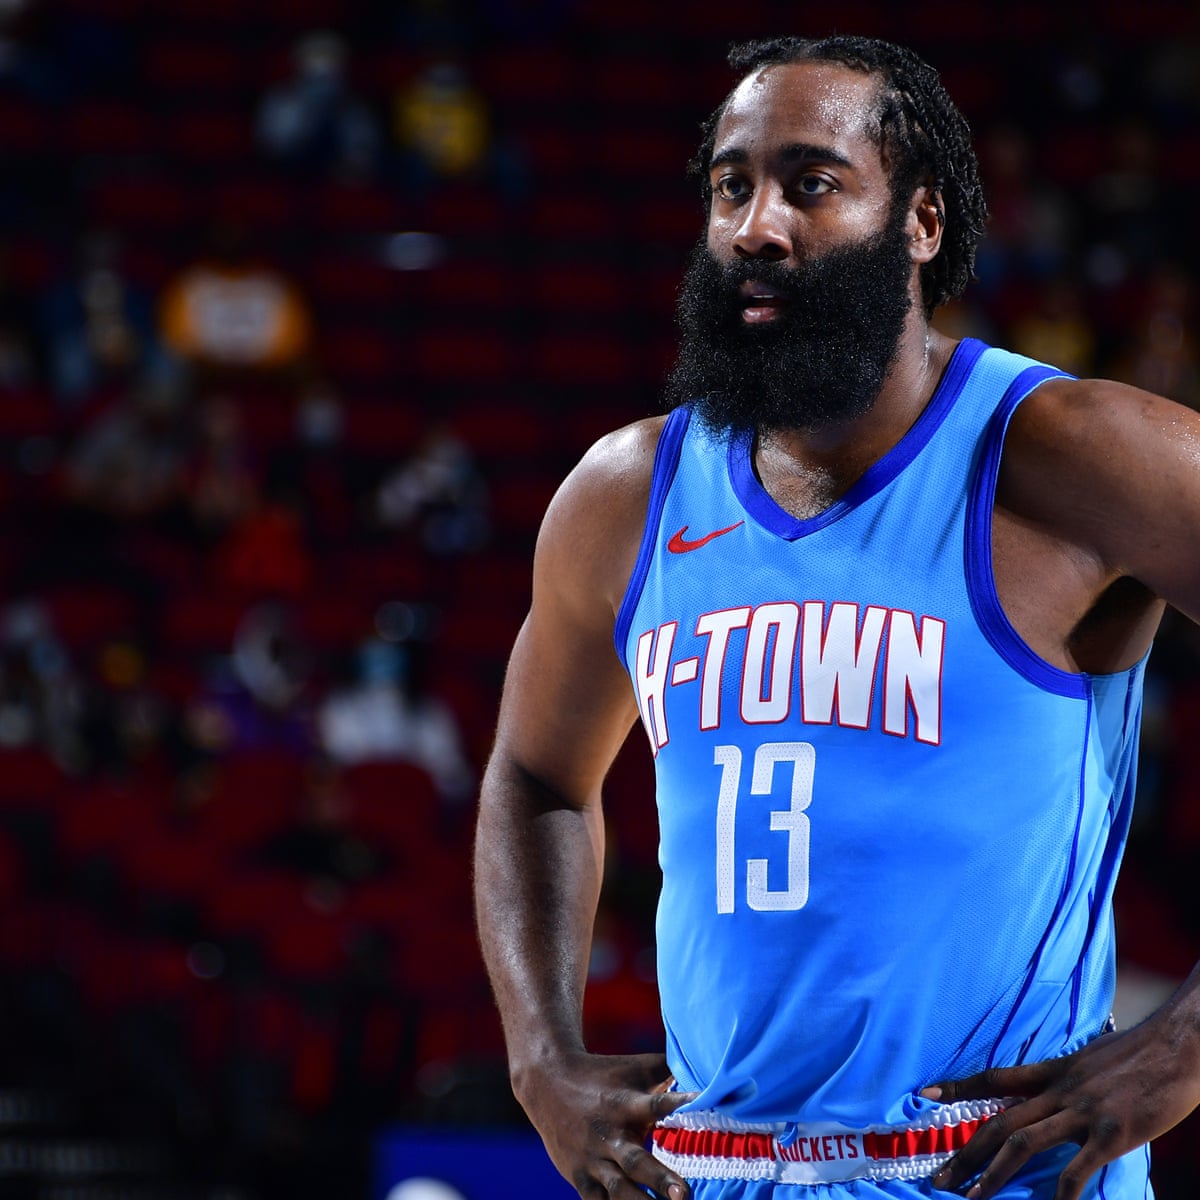 Houston Rockets: James Harden Says He's The Best Player In The NBA